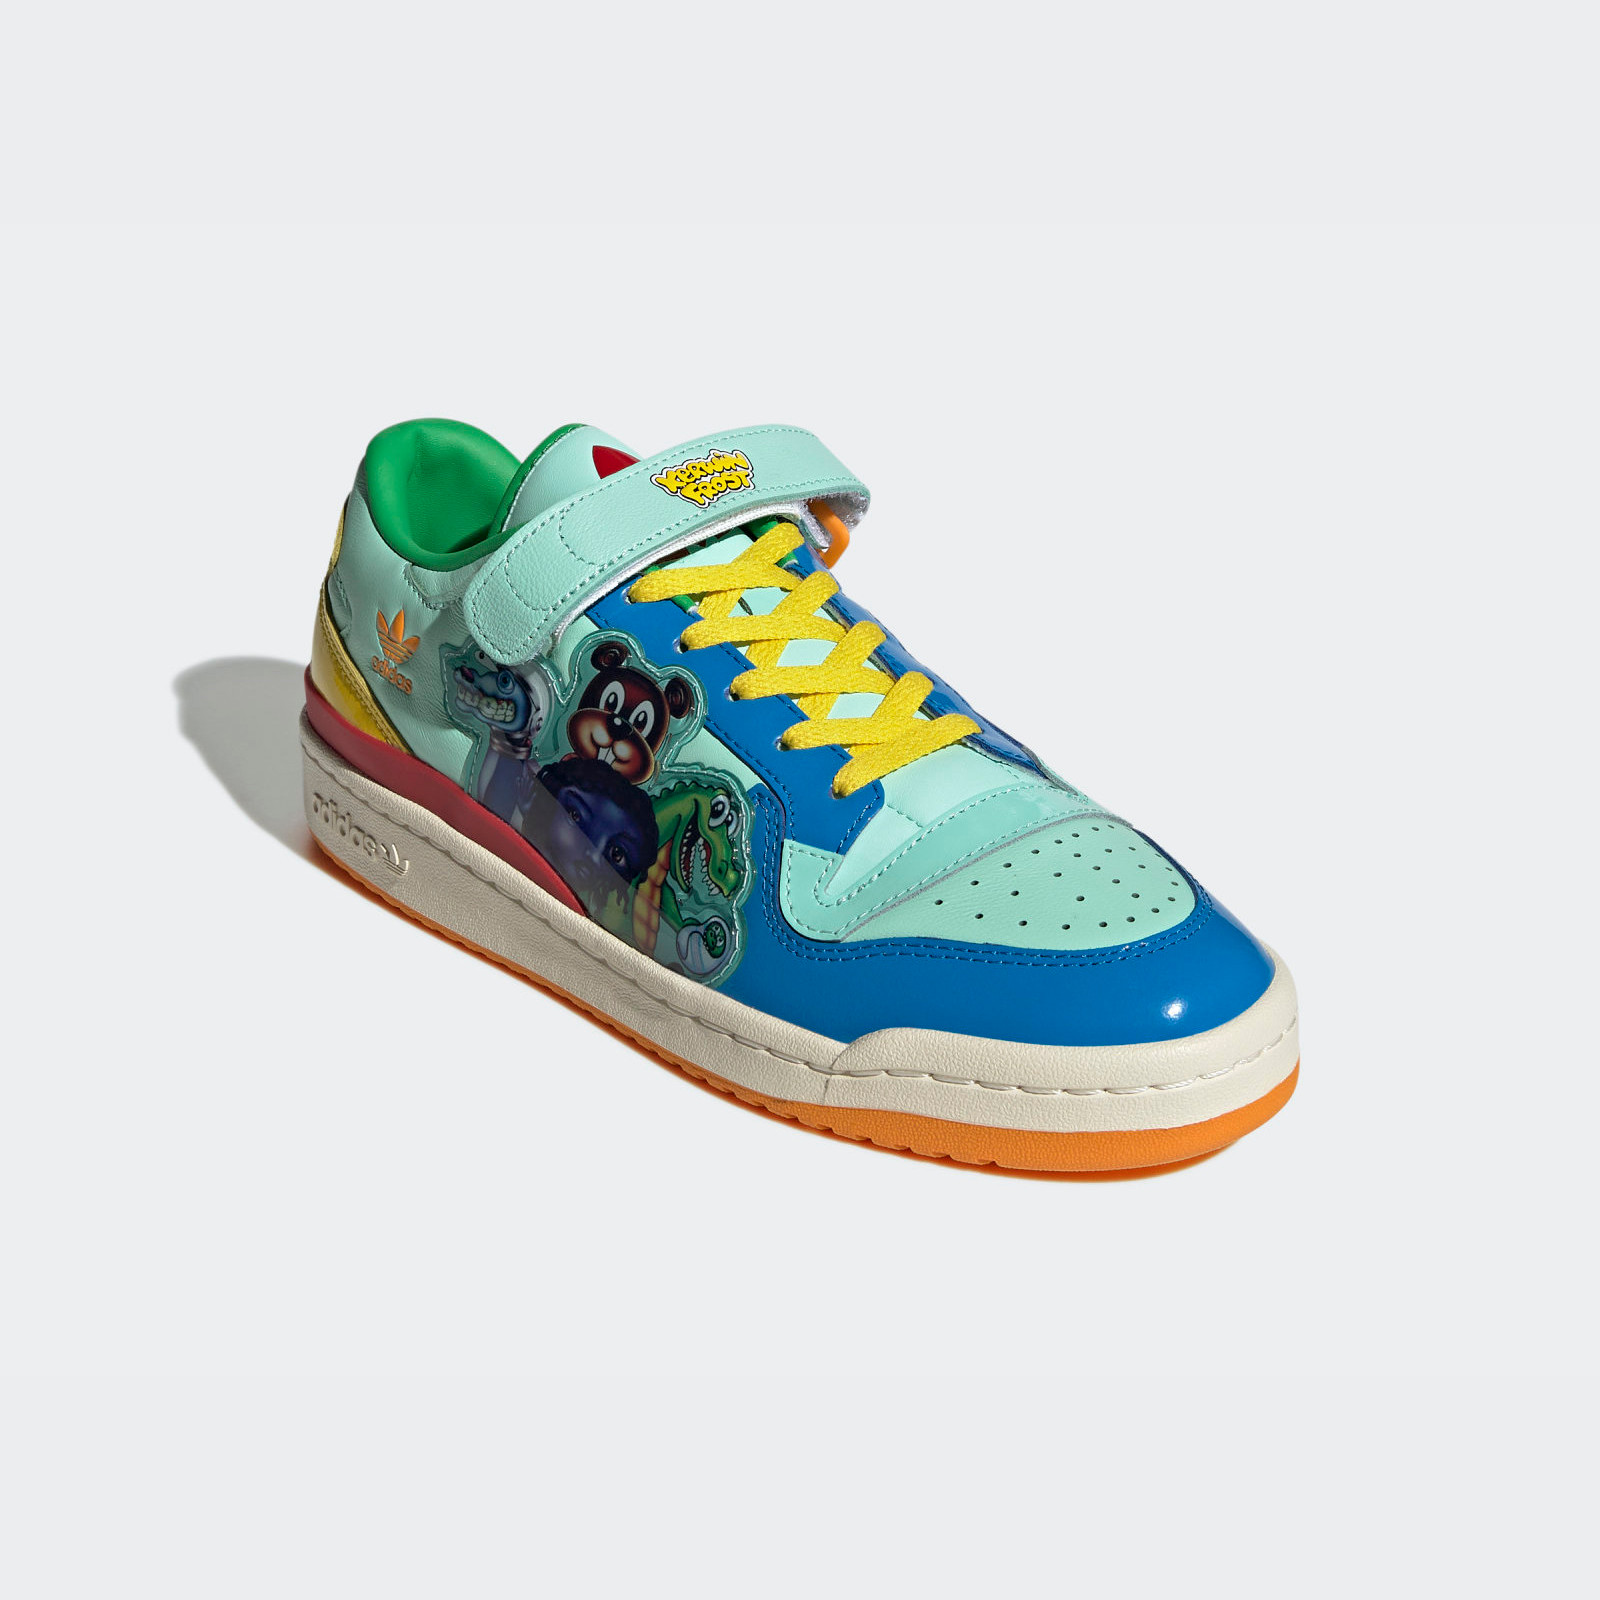 Adidas x Kerwin Frost
Forum Low Benchmate
Clear Mint / Multicolor